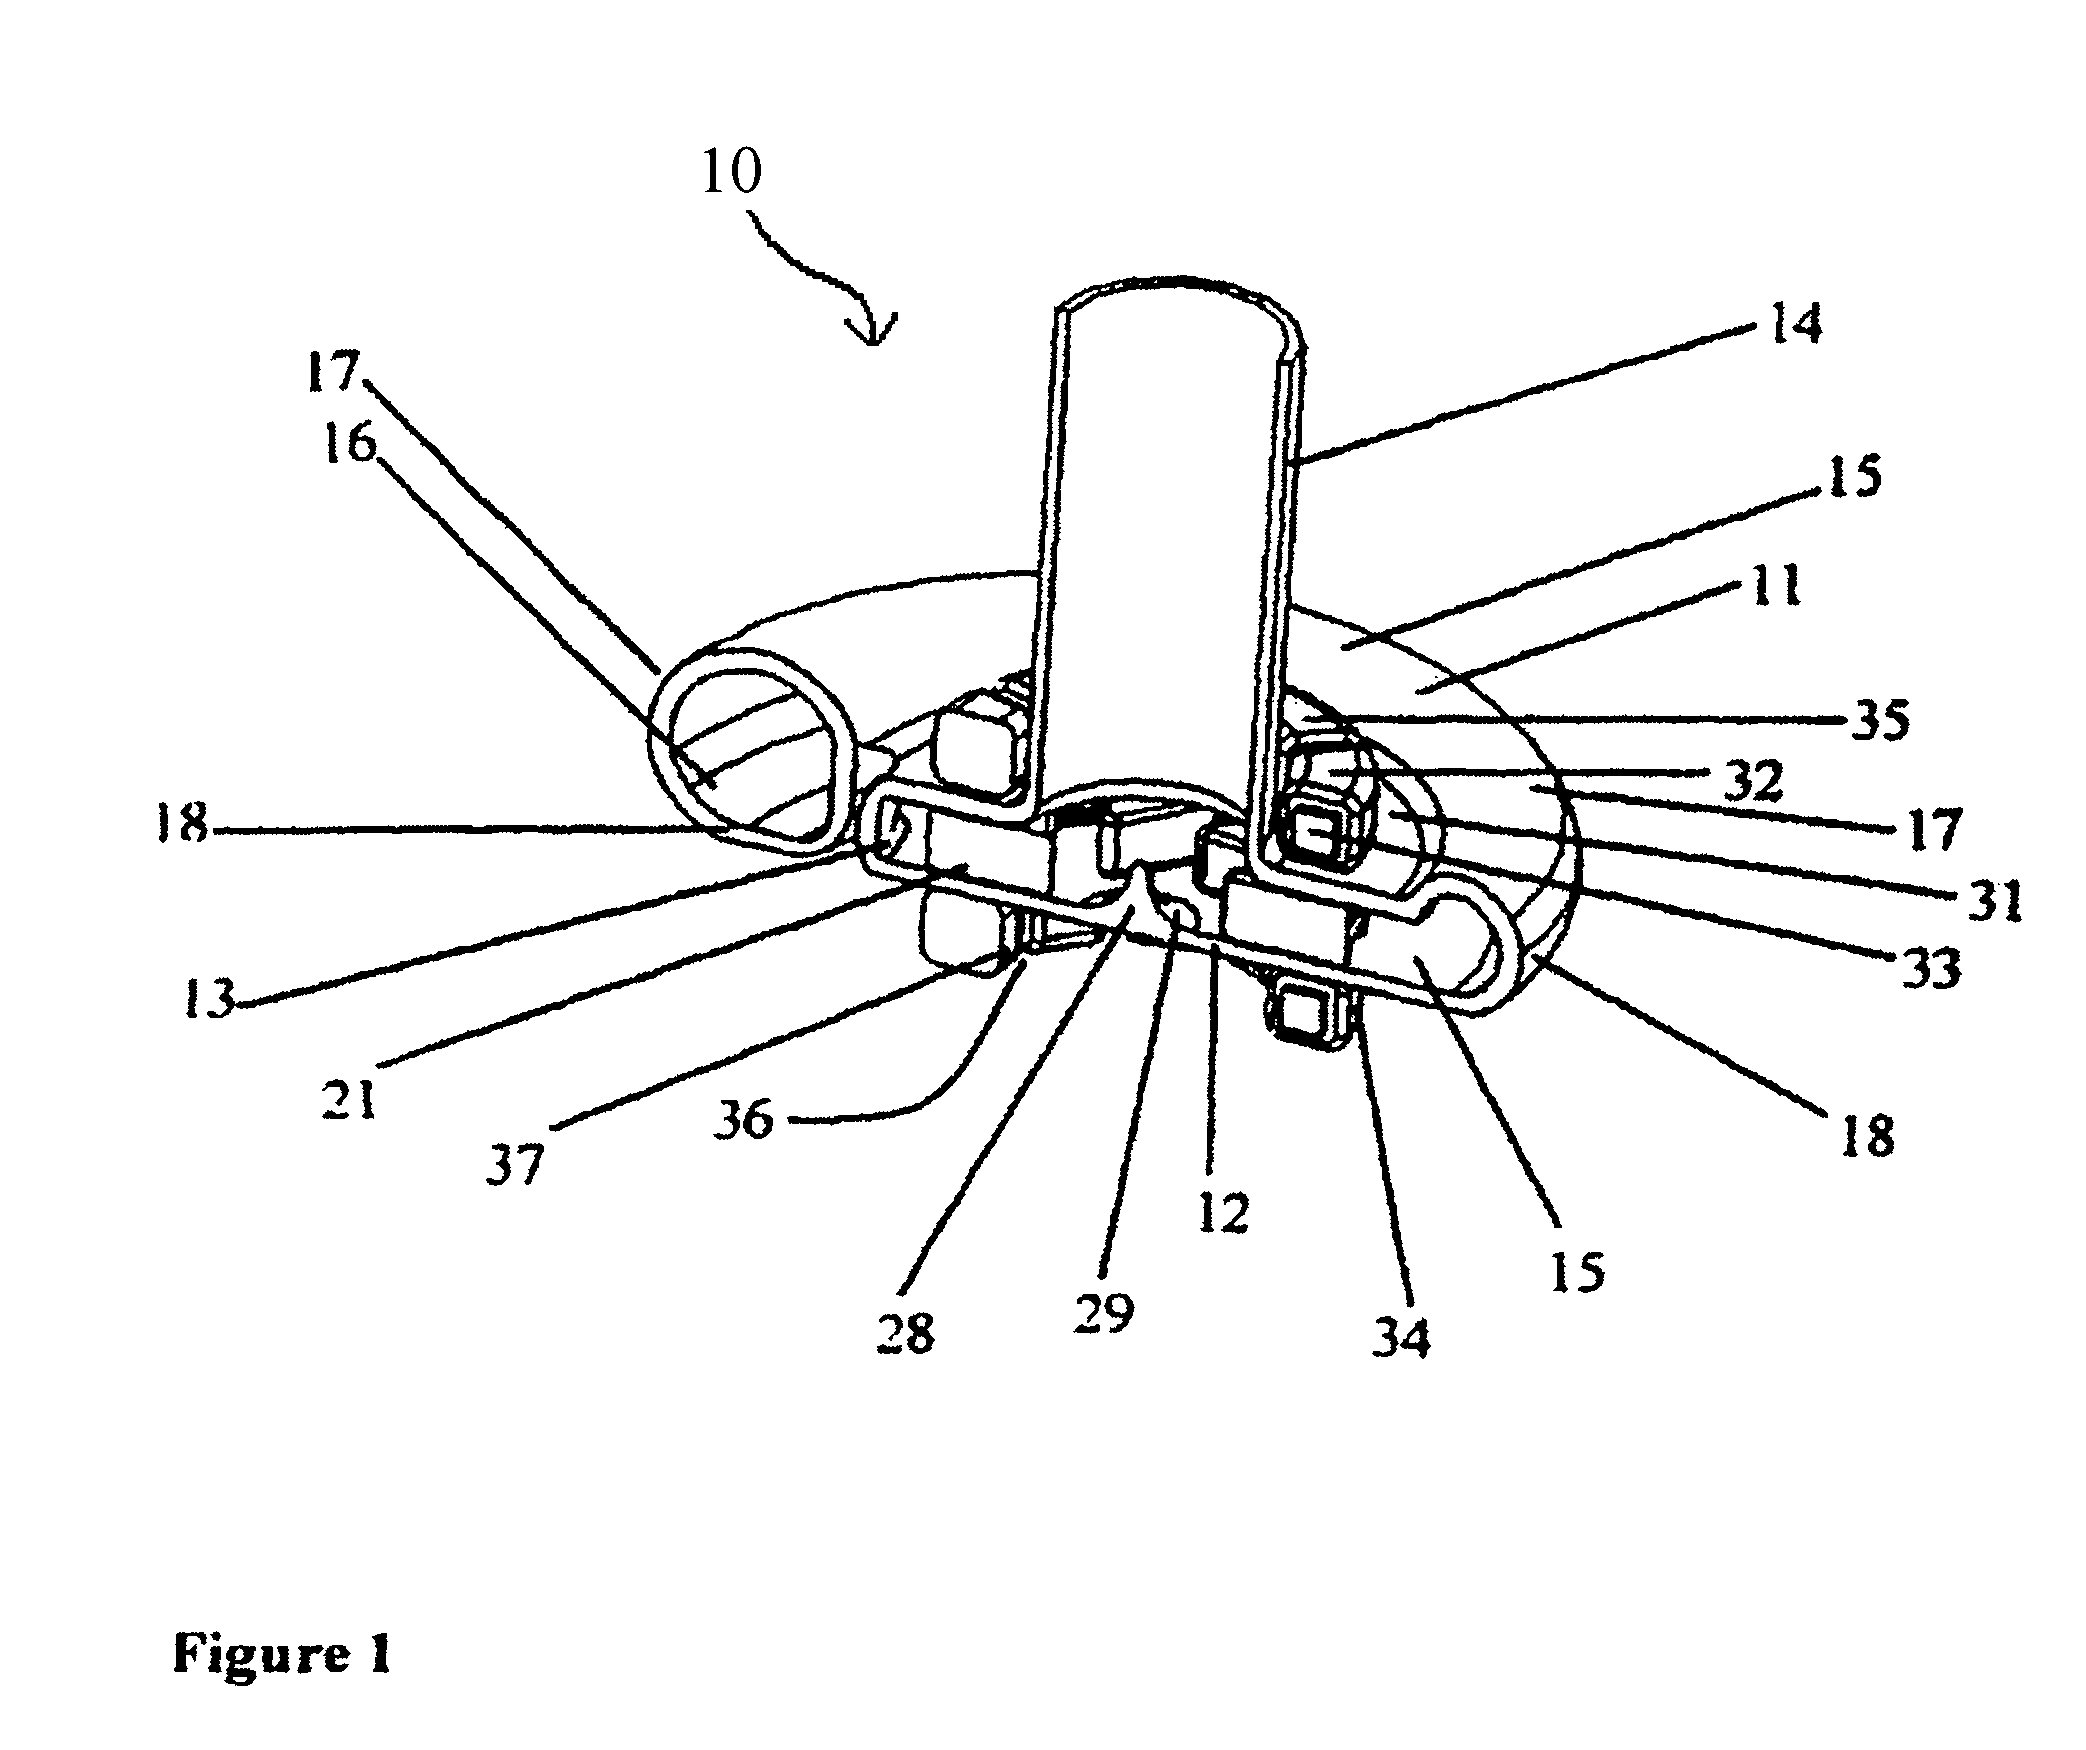 Centrifugal rotary blood pump with impeller having a hydrodynamic thrust bearing surface